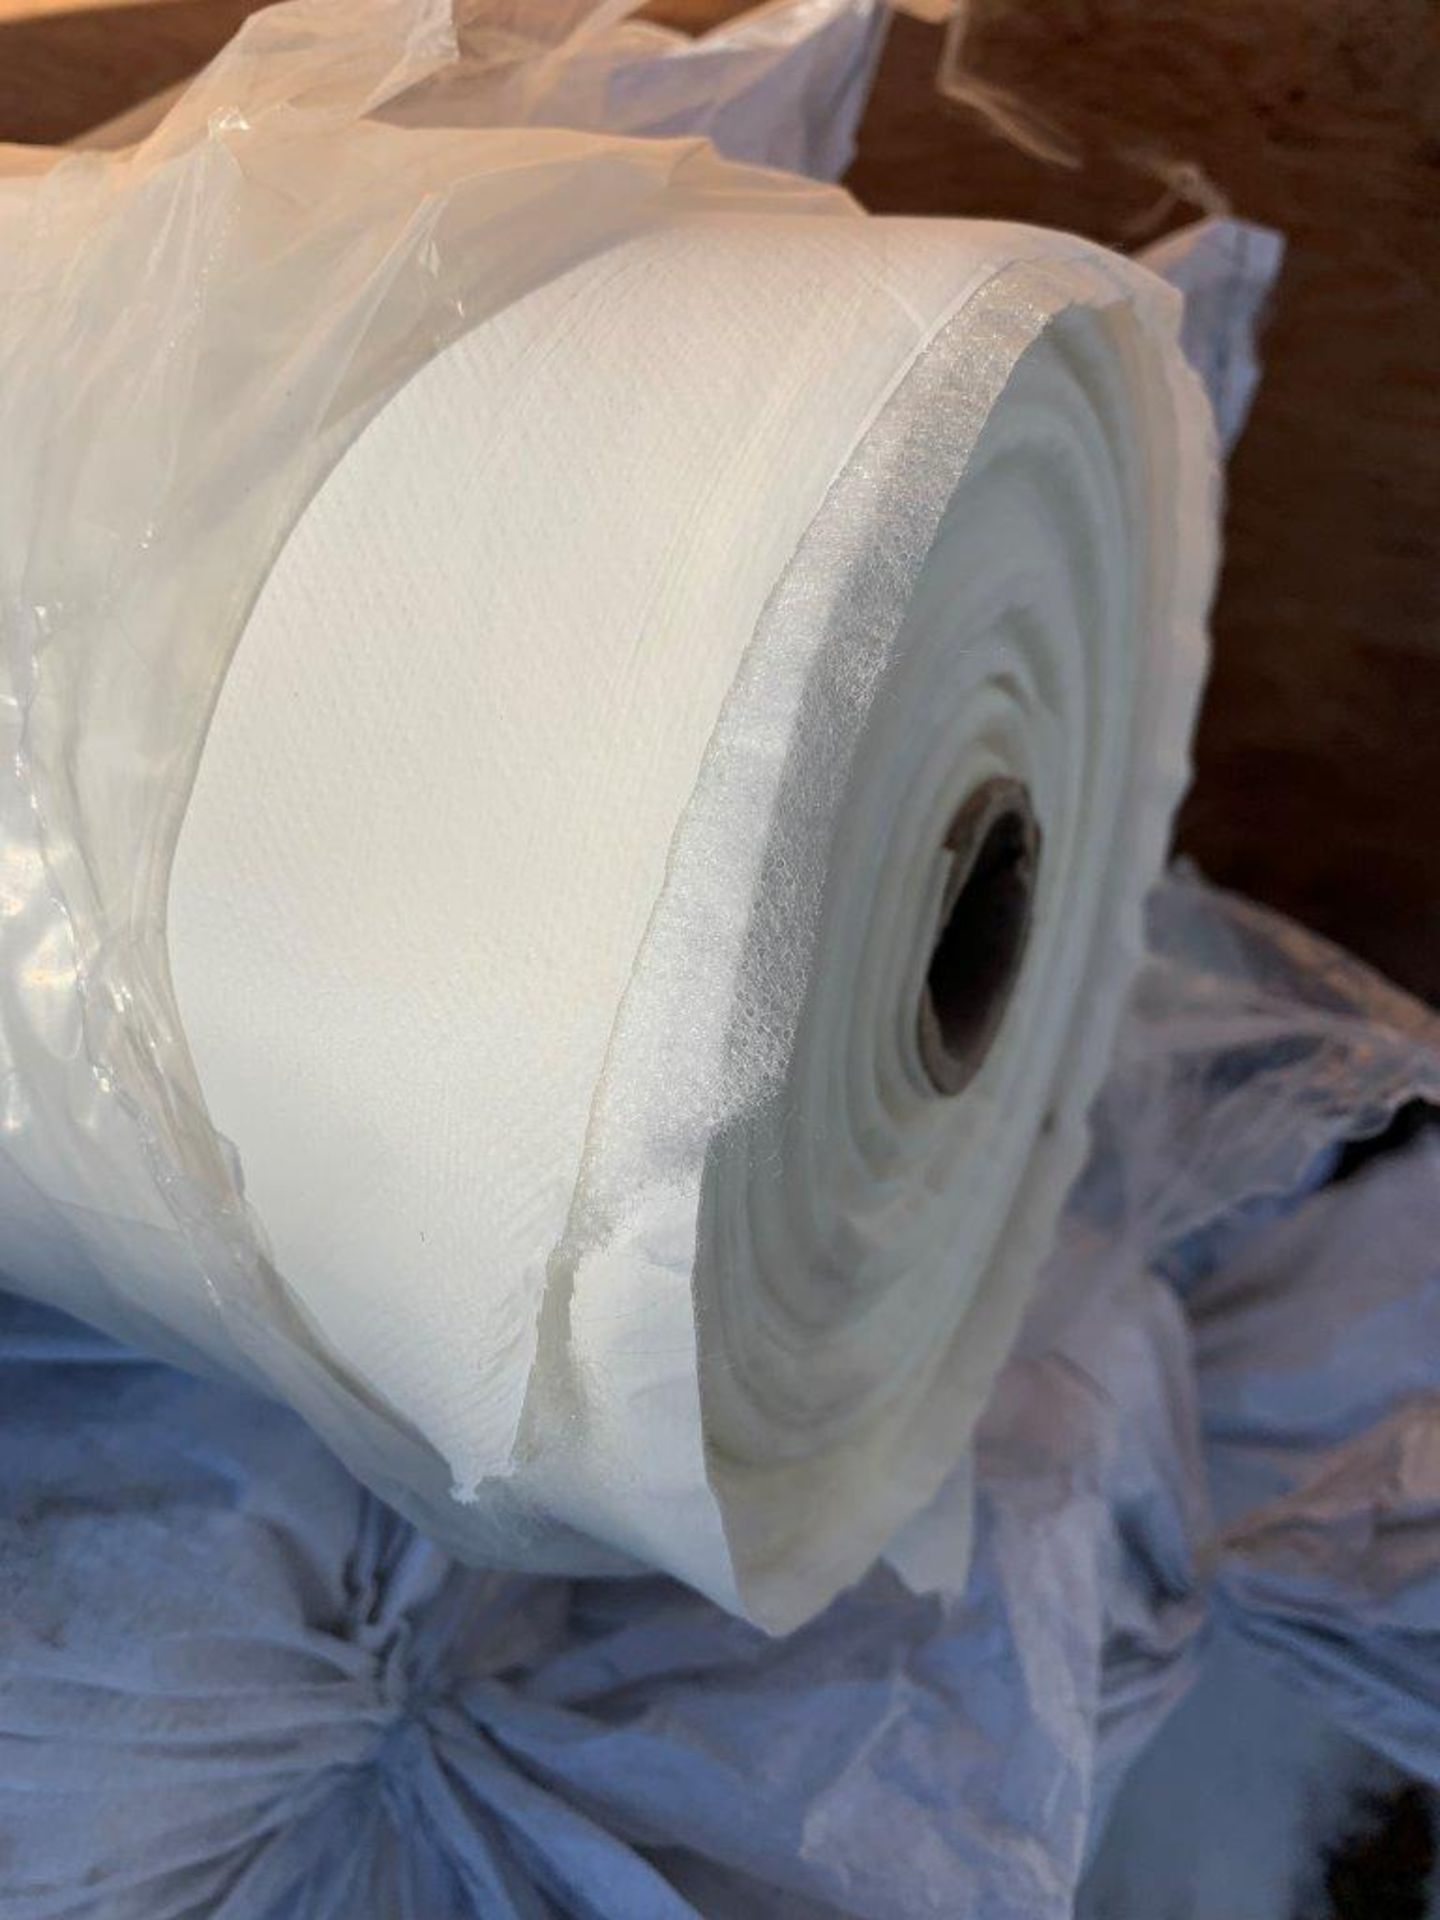 10-ROLLS NON-WOVEN FABRIC 1.55M X 100M (TIMES THE MONEY X 10) - Image 4 of 4